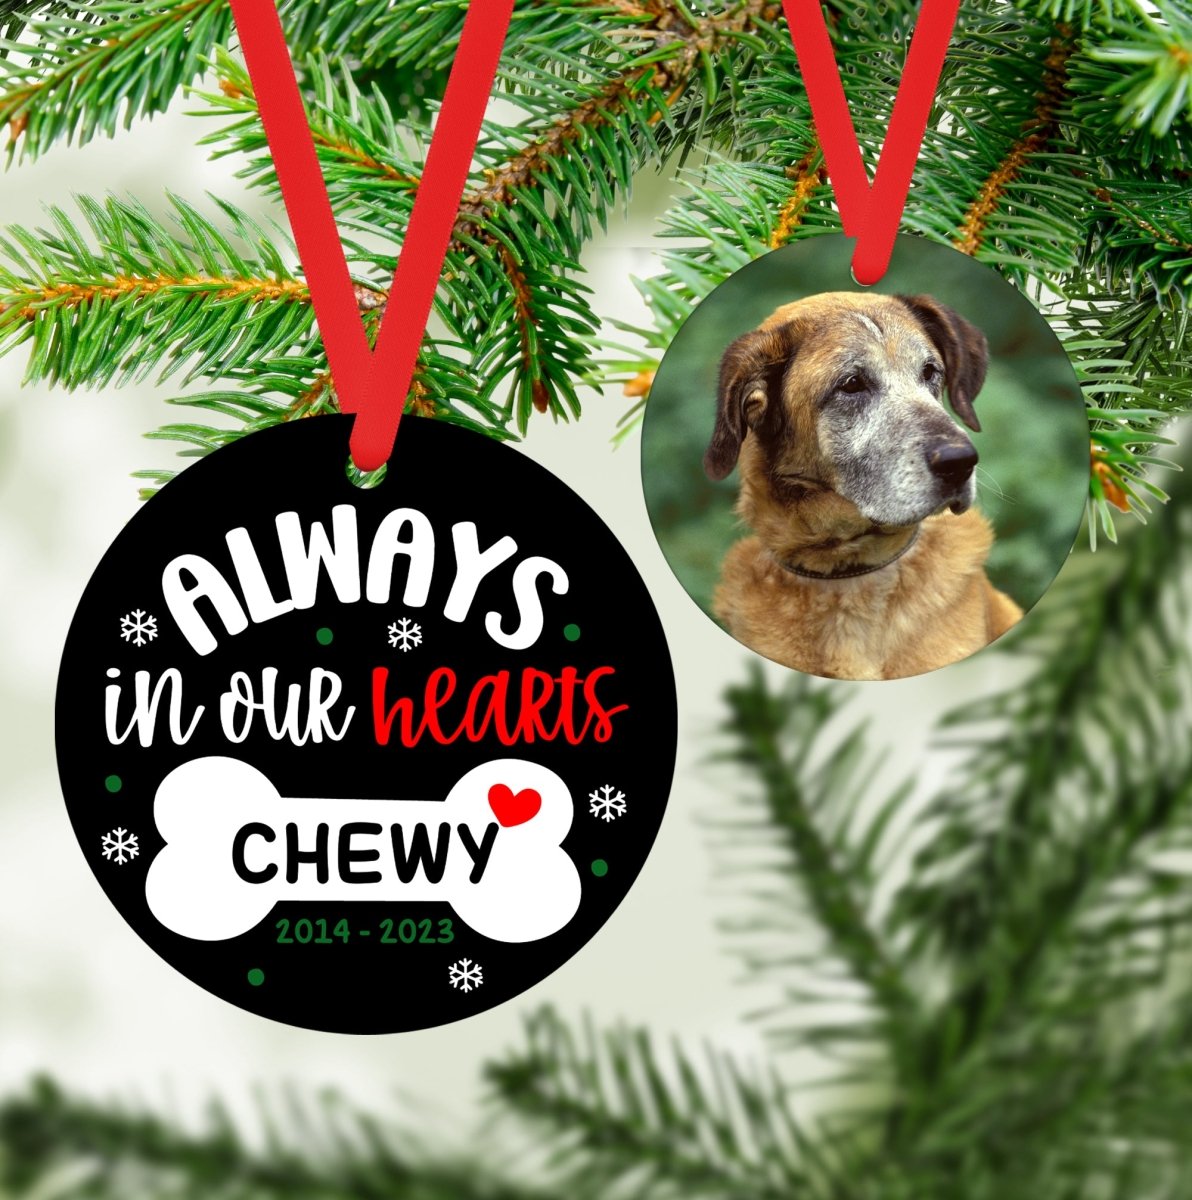 Always In My Heart Ornament - Oh My Paw'd